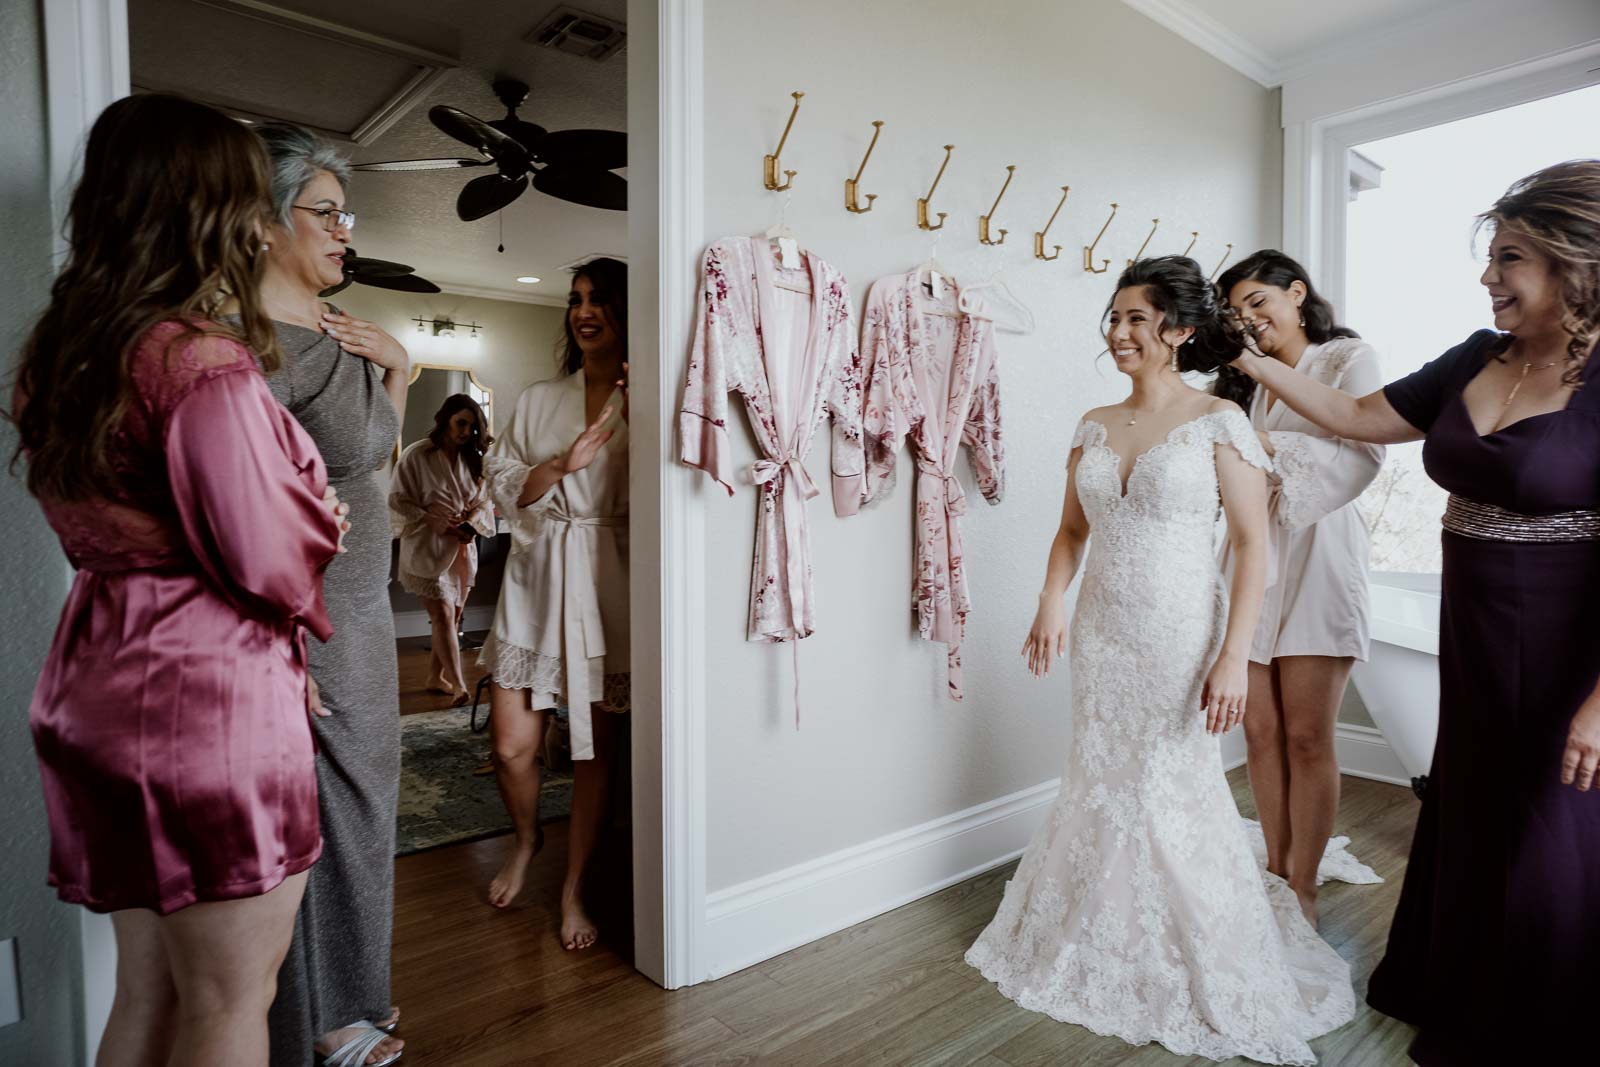 Her mother-in-law gasps in delight seeing her daughter-in-law in the dress the first time